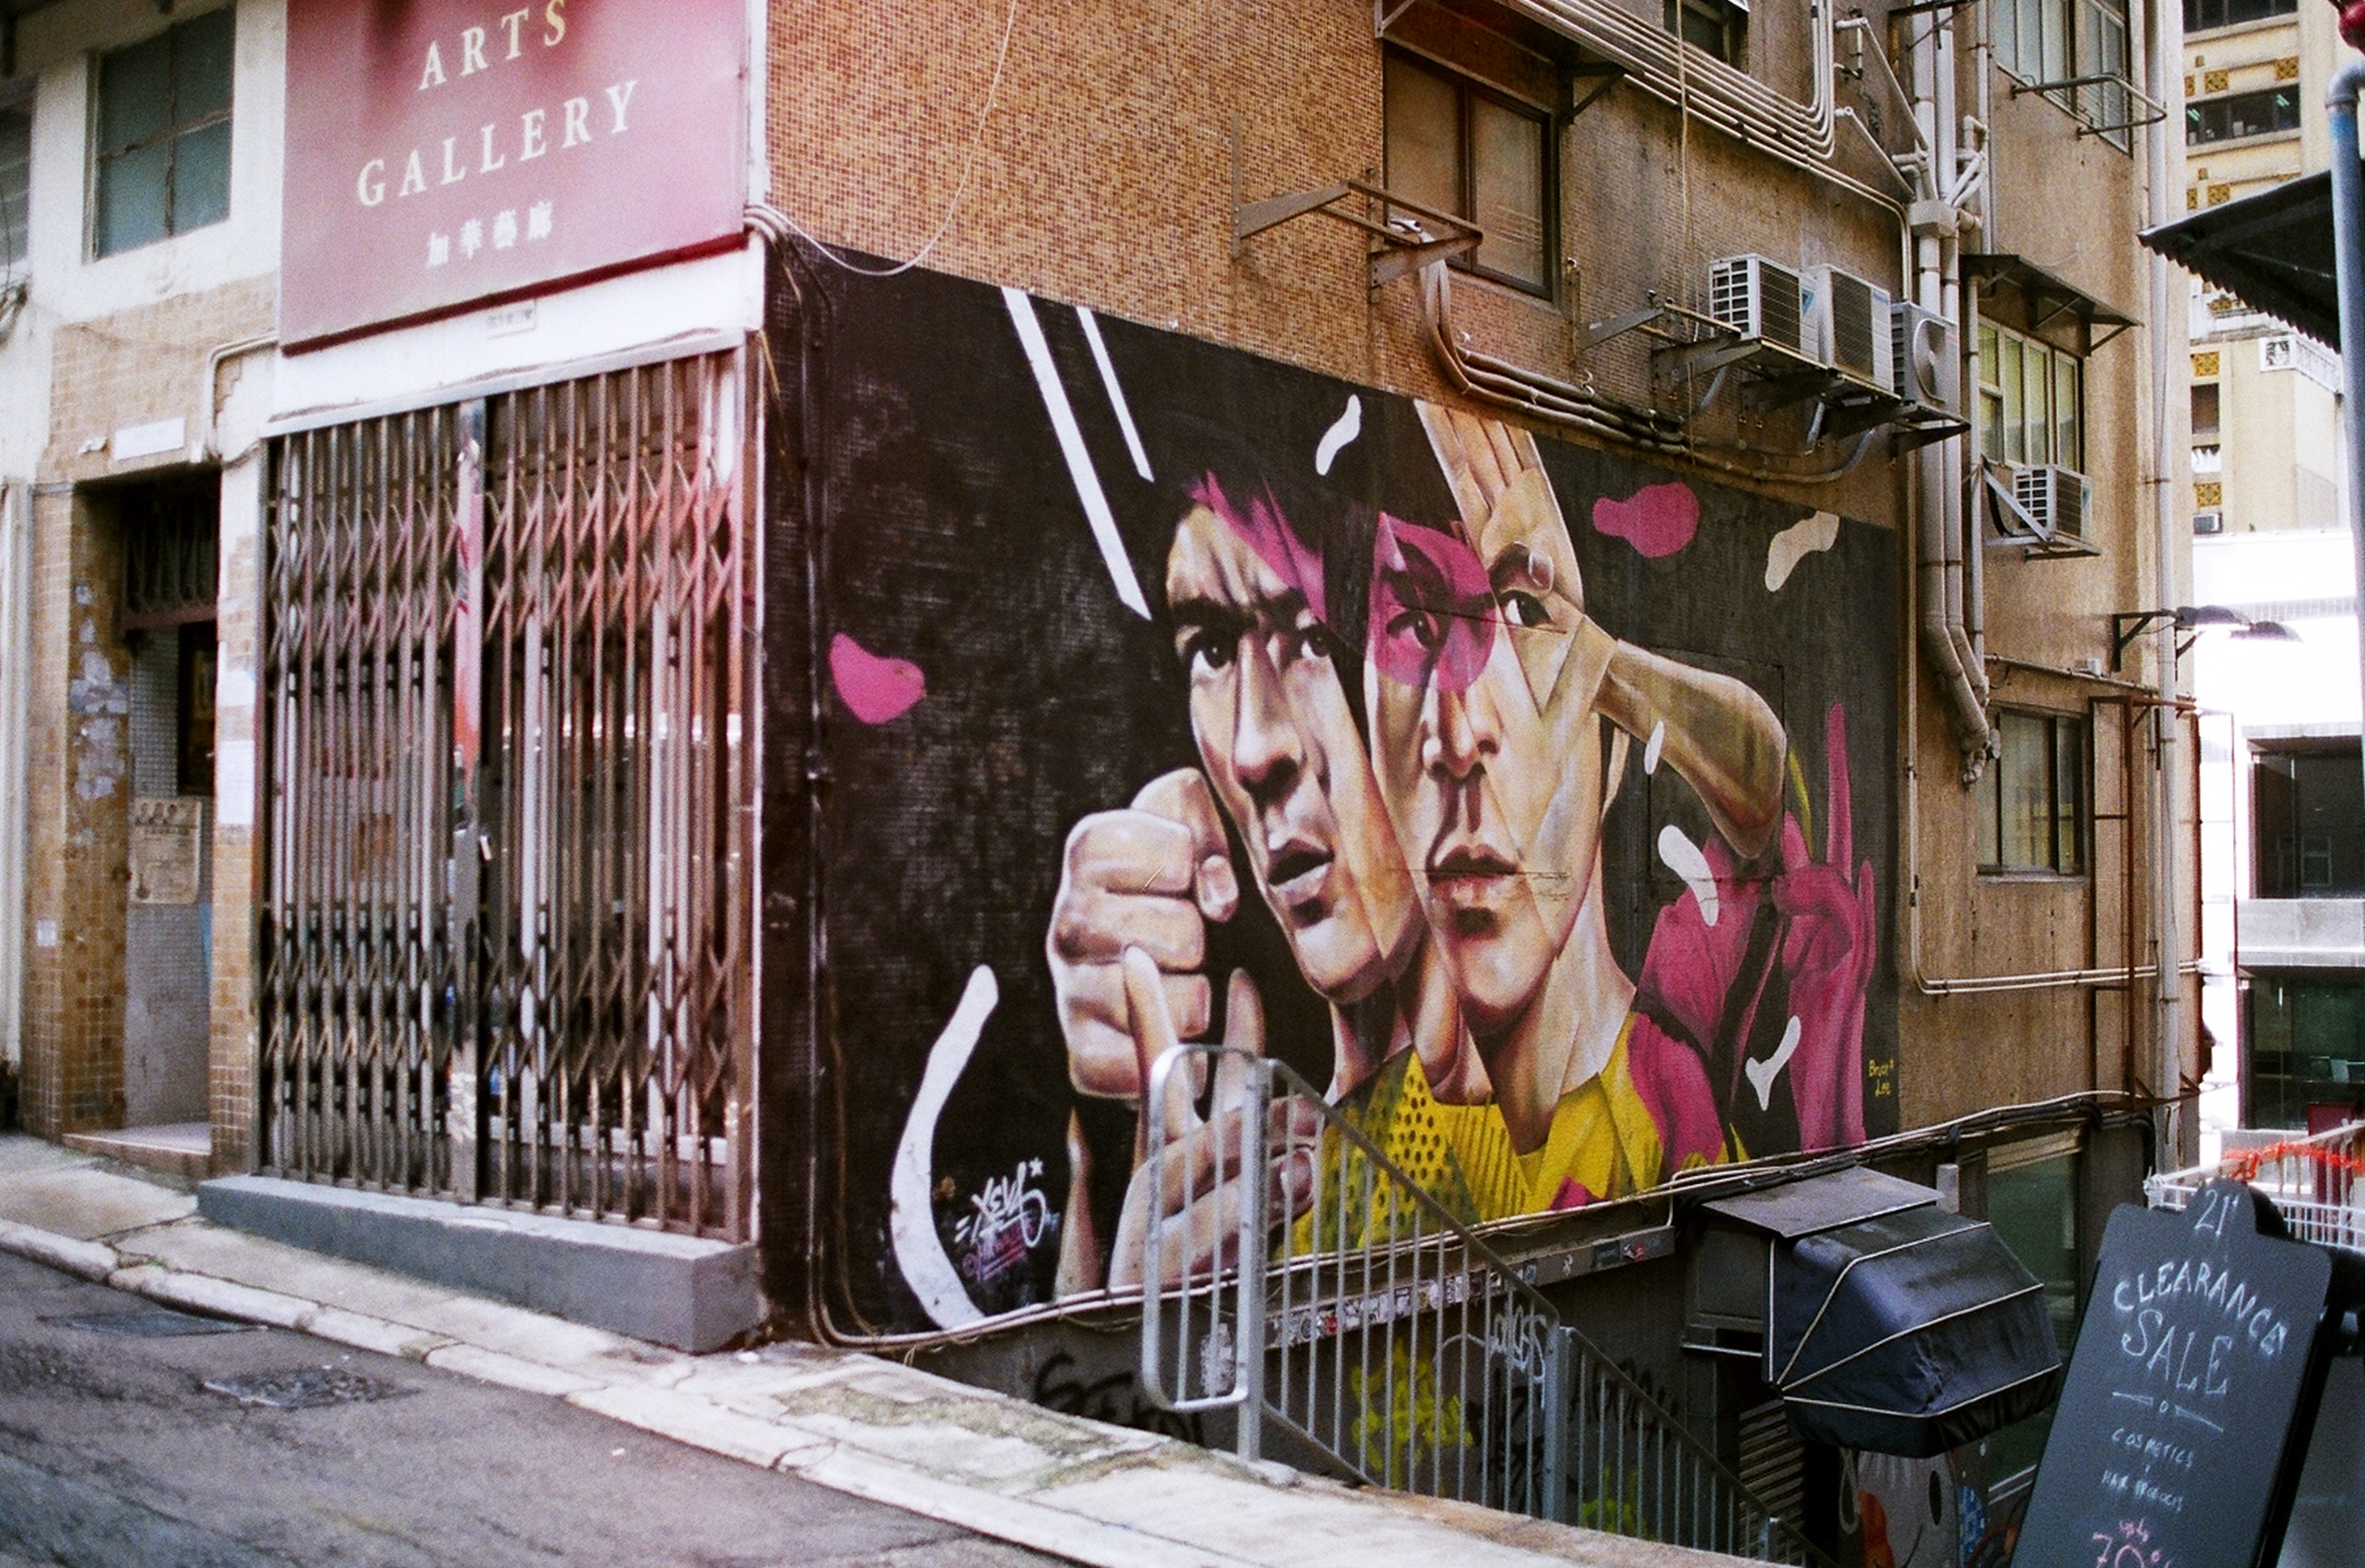 A Bruce Lee mural on Square Street